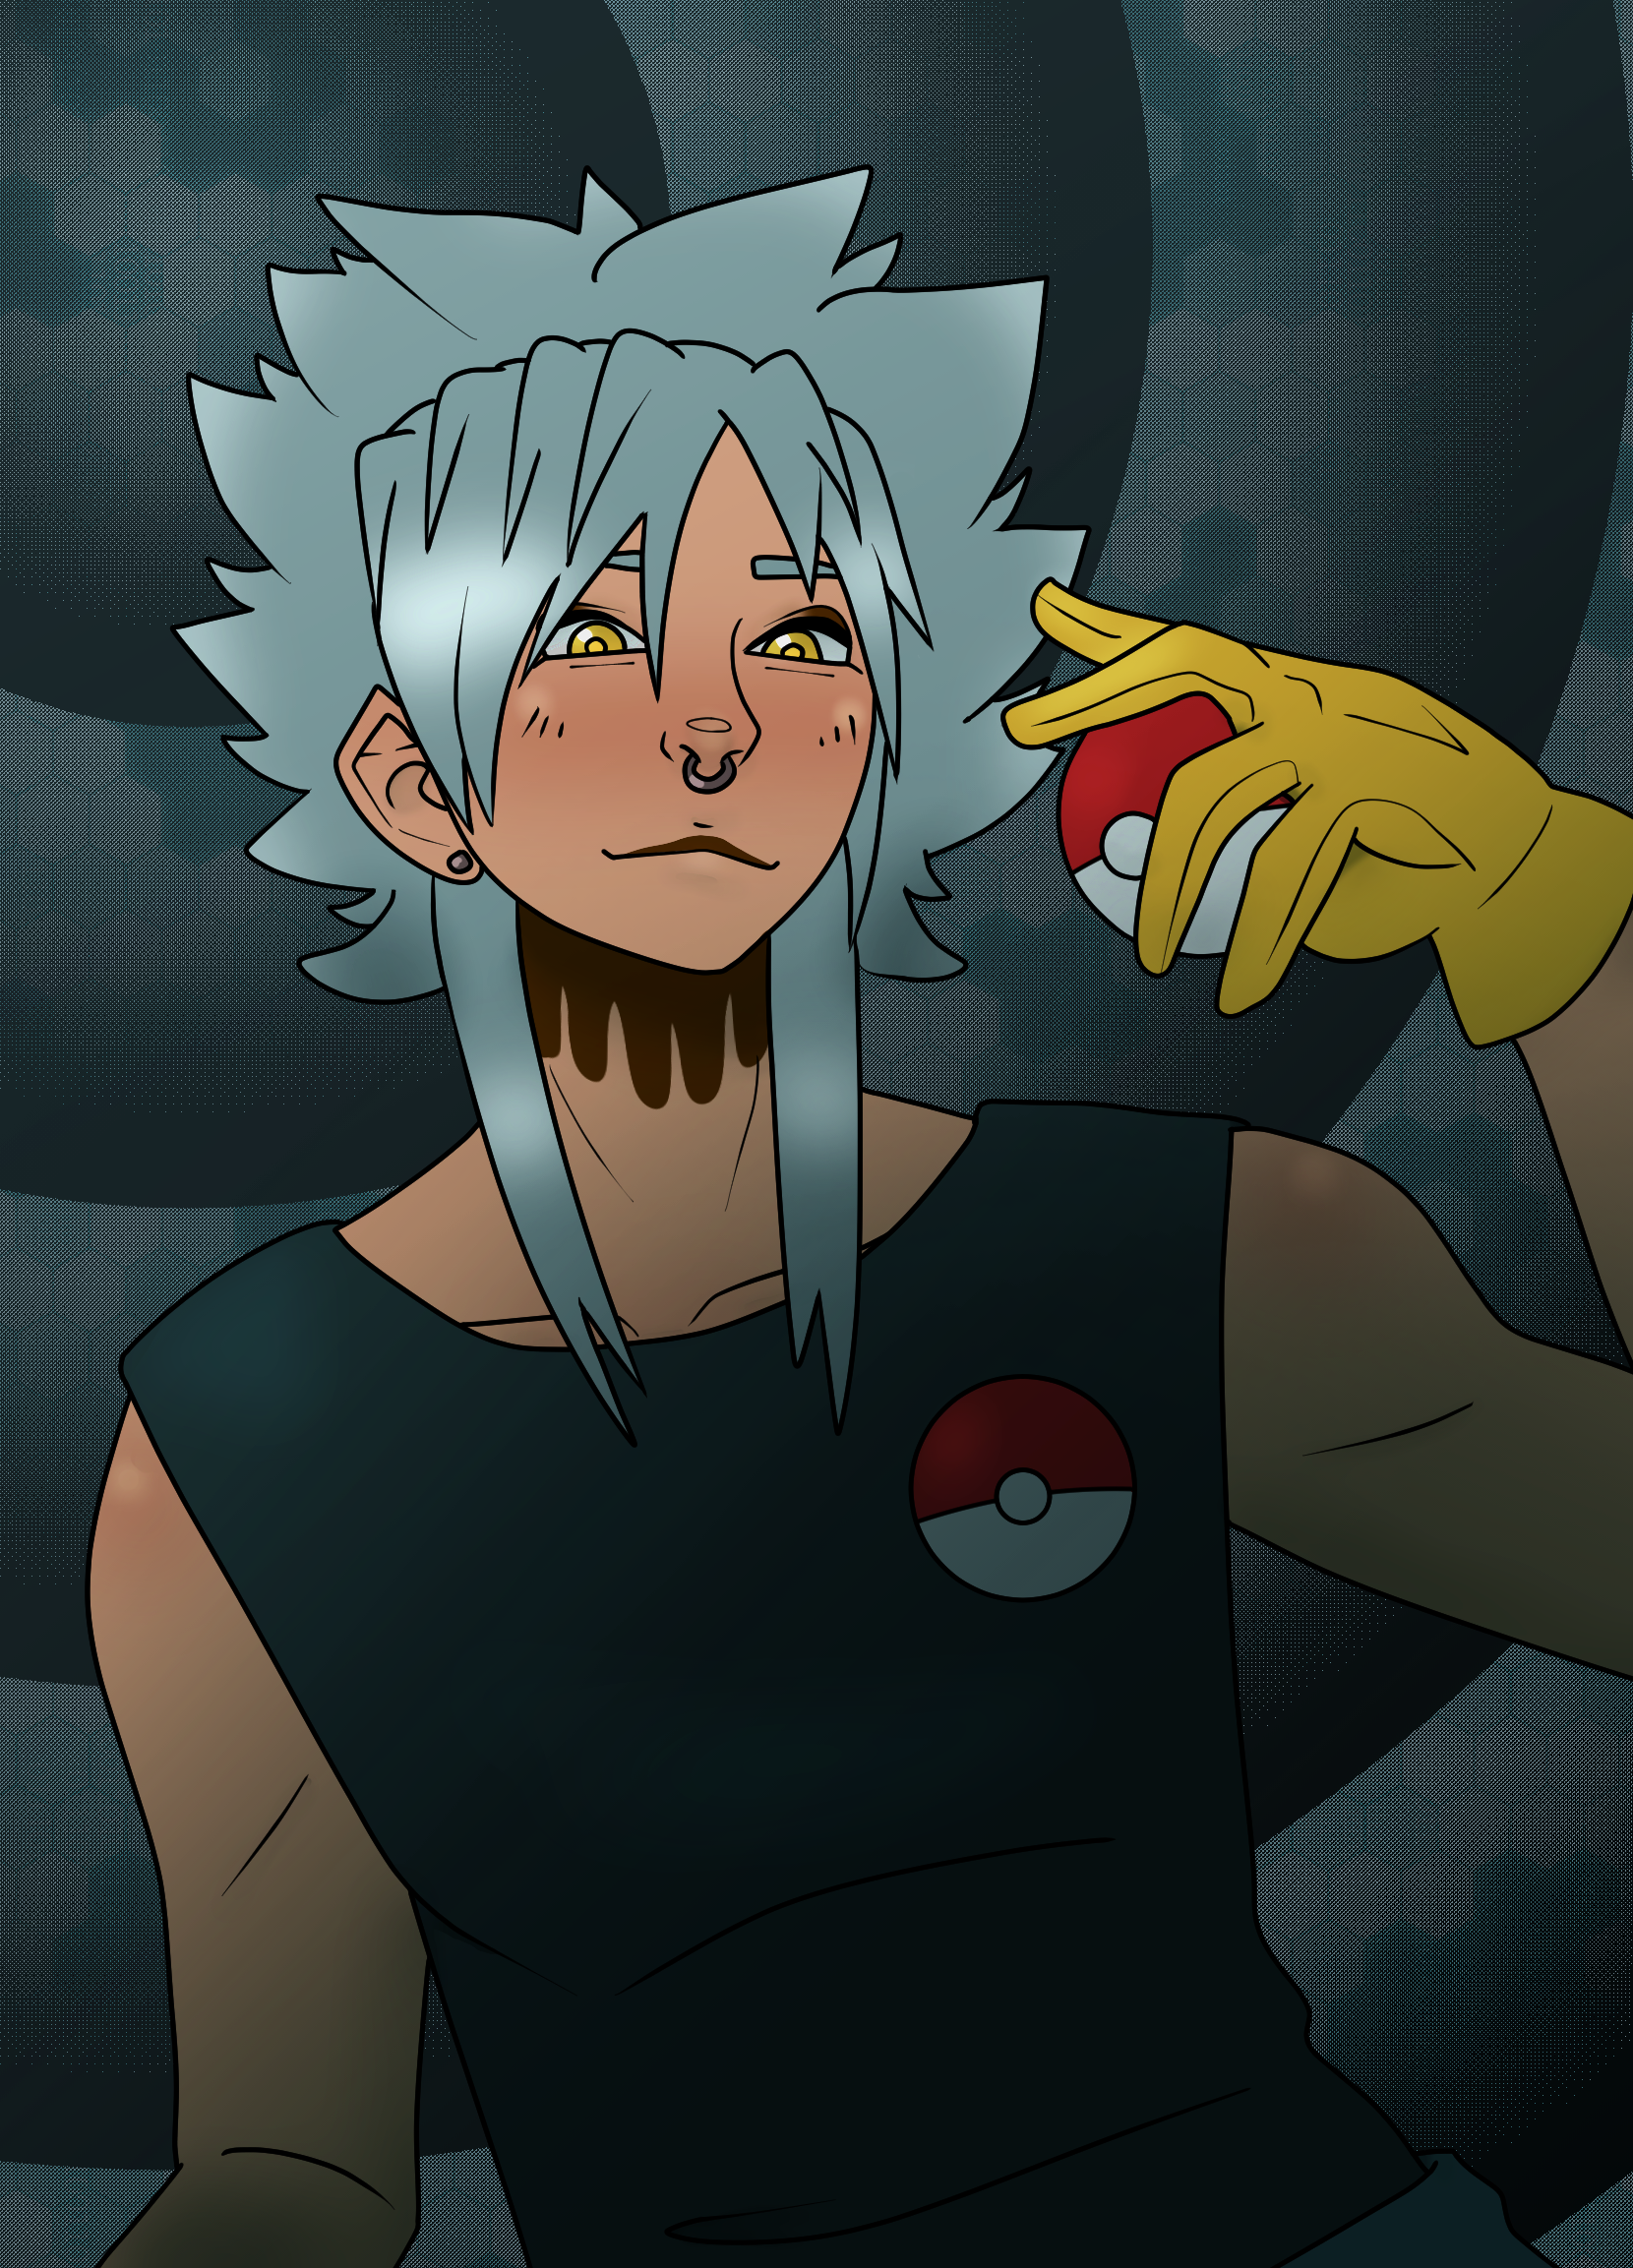 My Pokemon OC, Stahl, posed with a pokeball